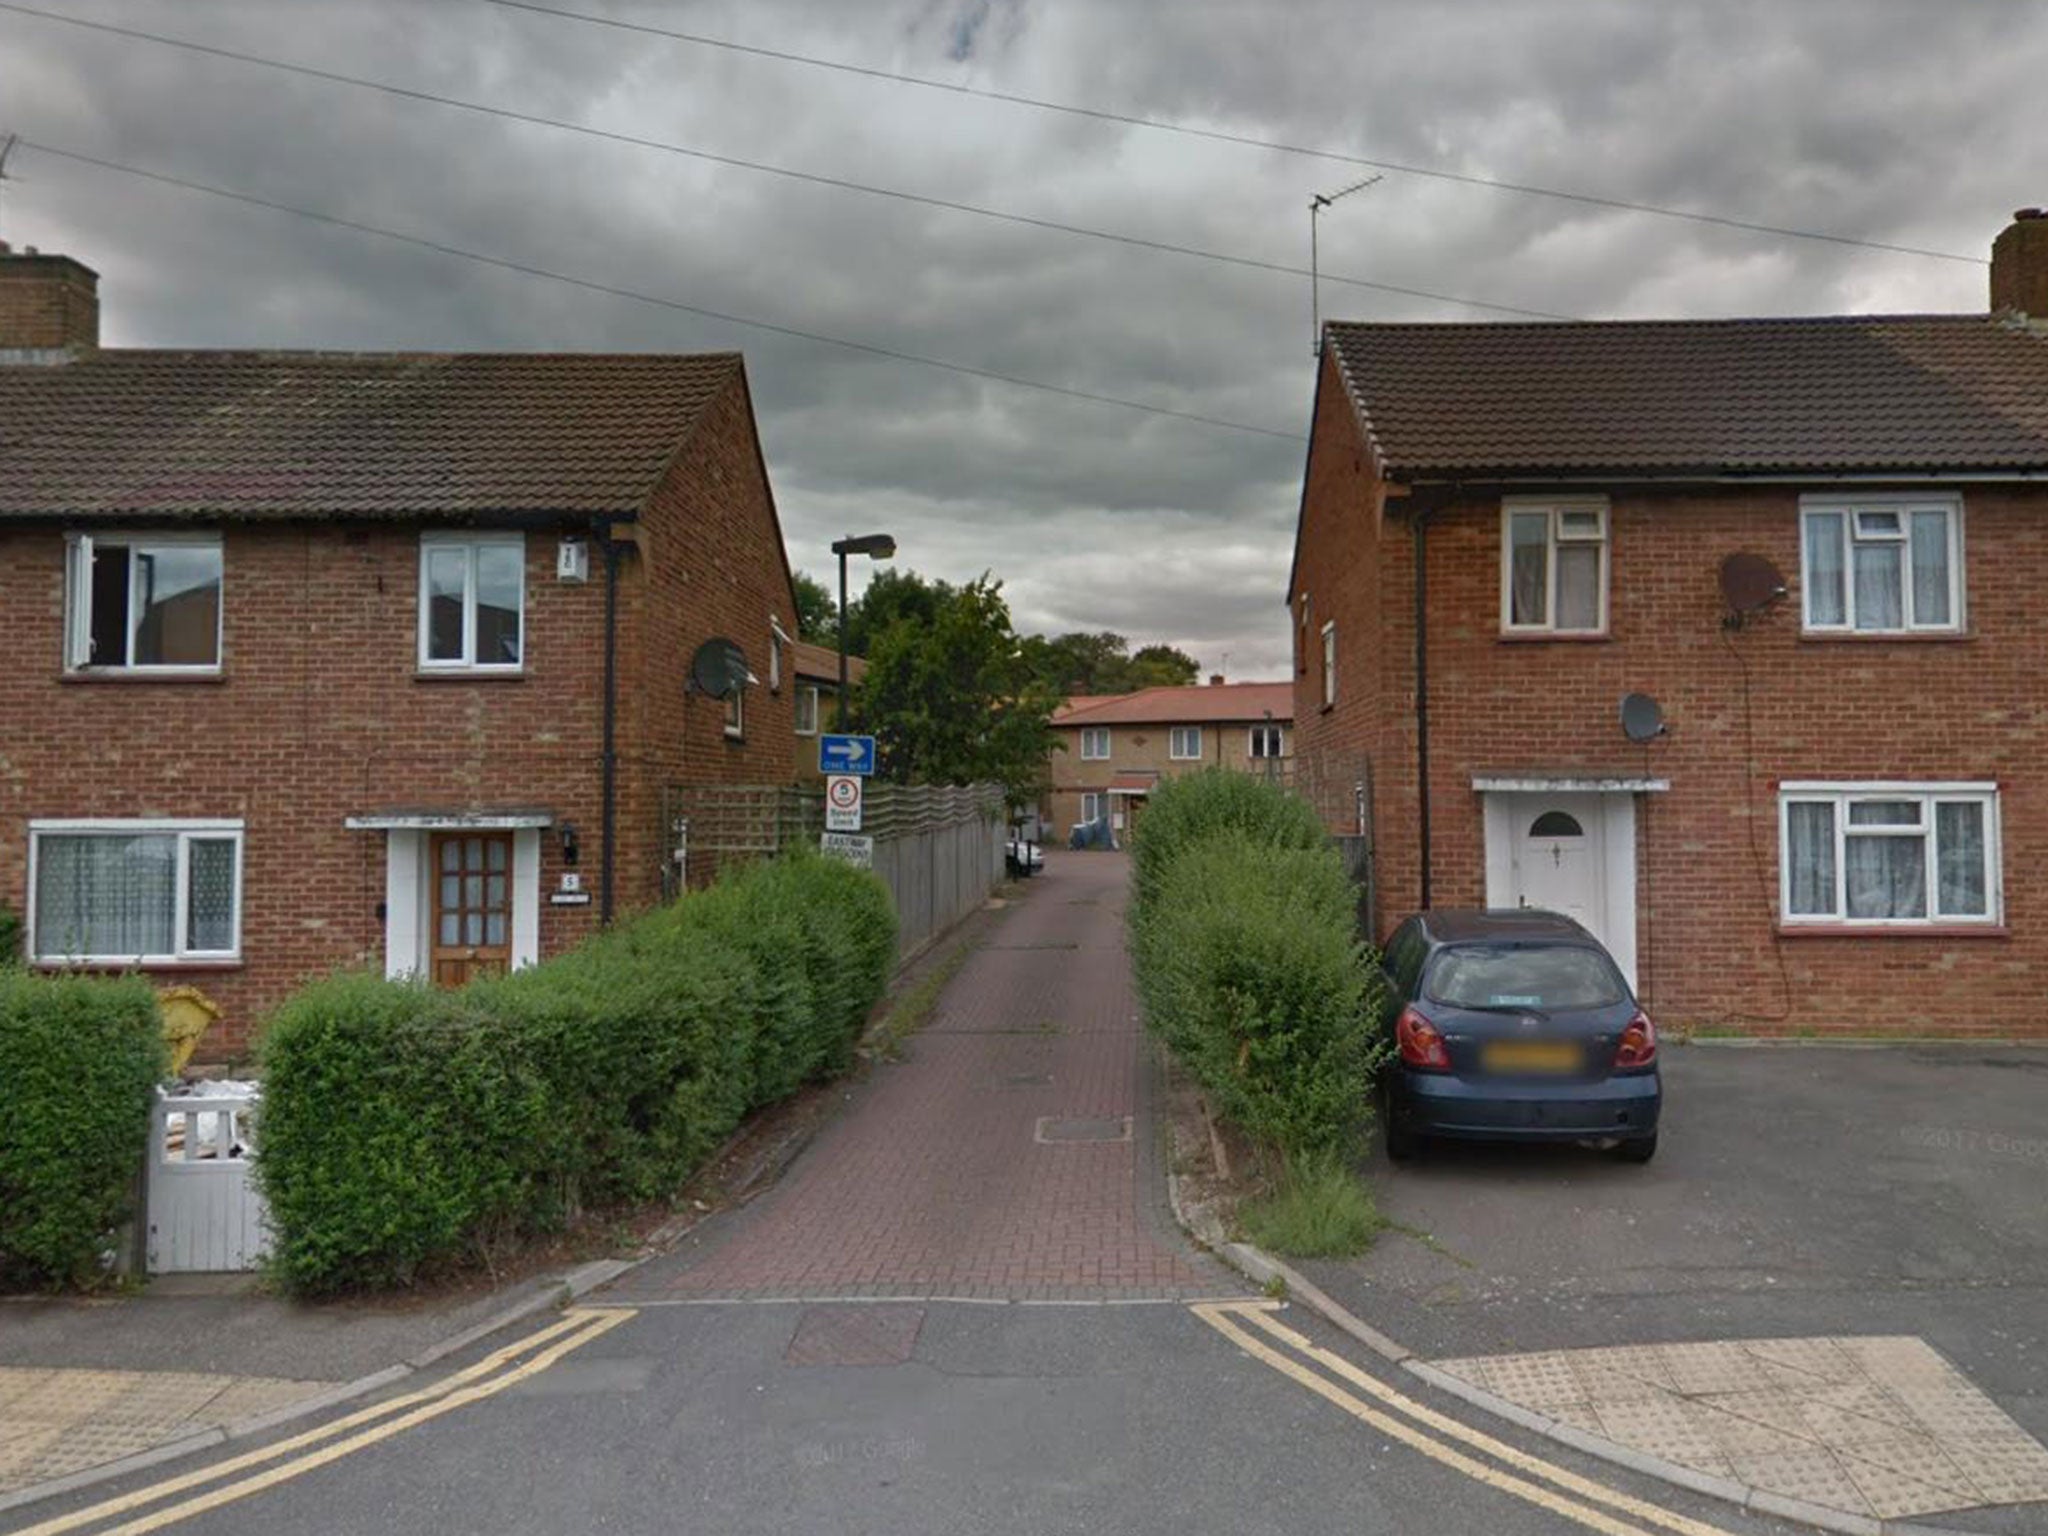 The man was chased down and stabbed in Eastway Crescent, a quiet north London street